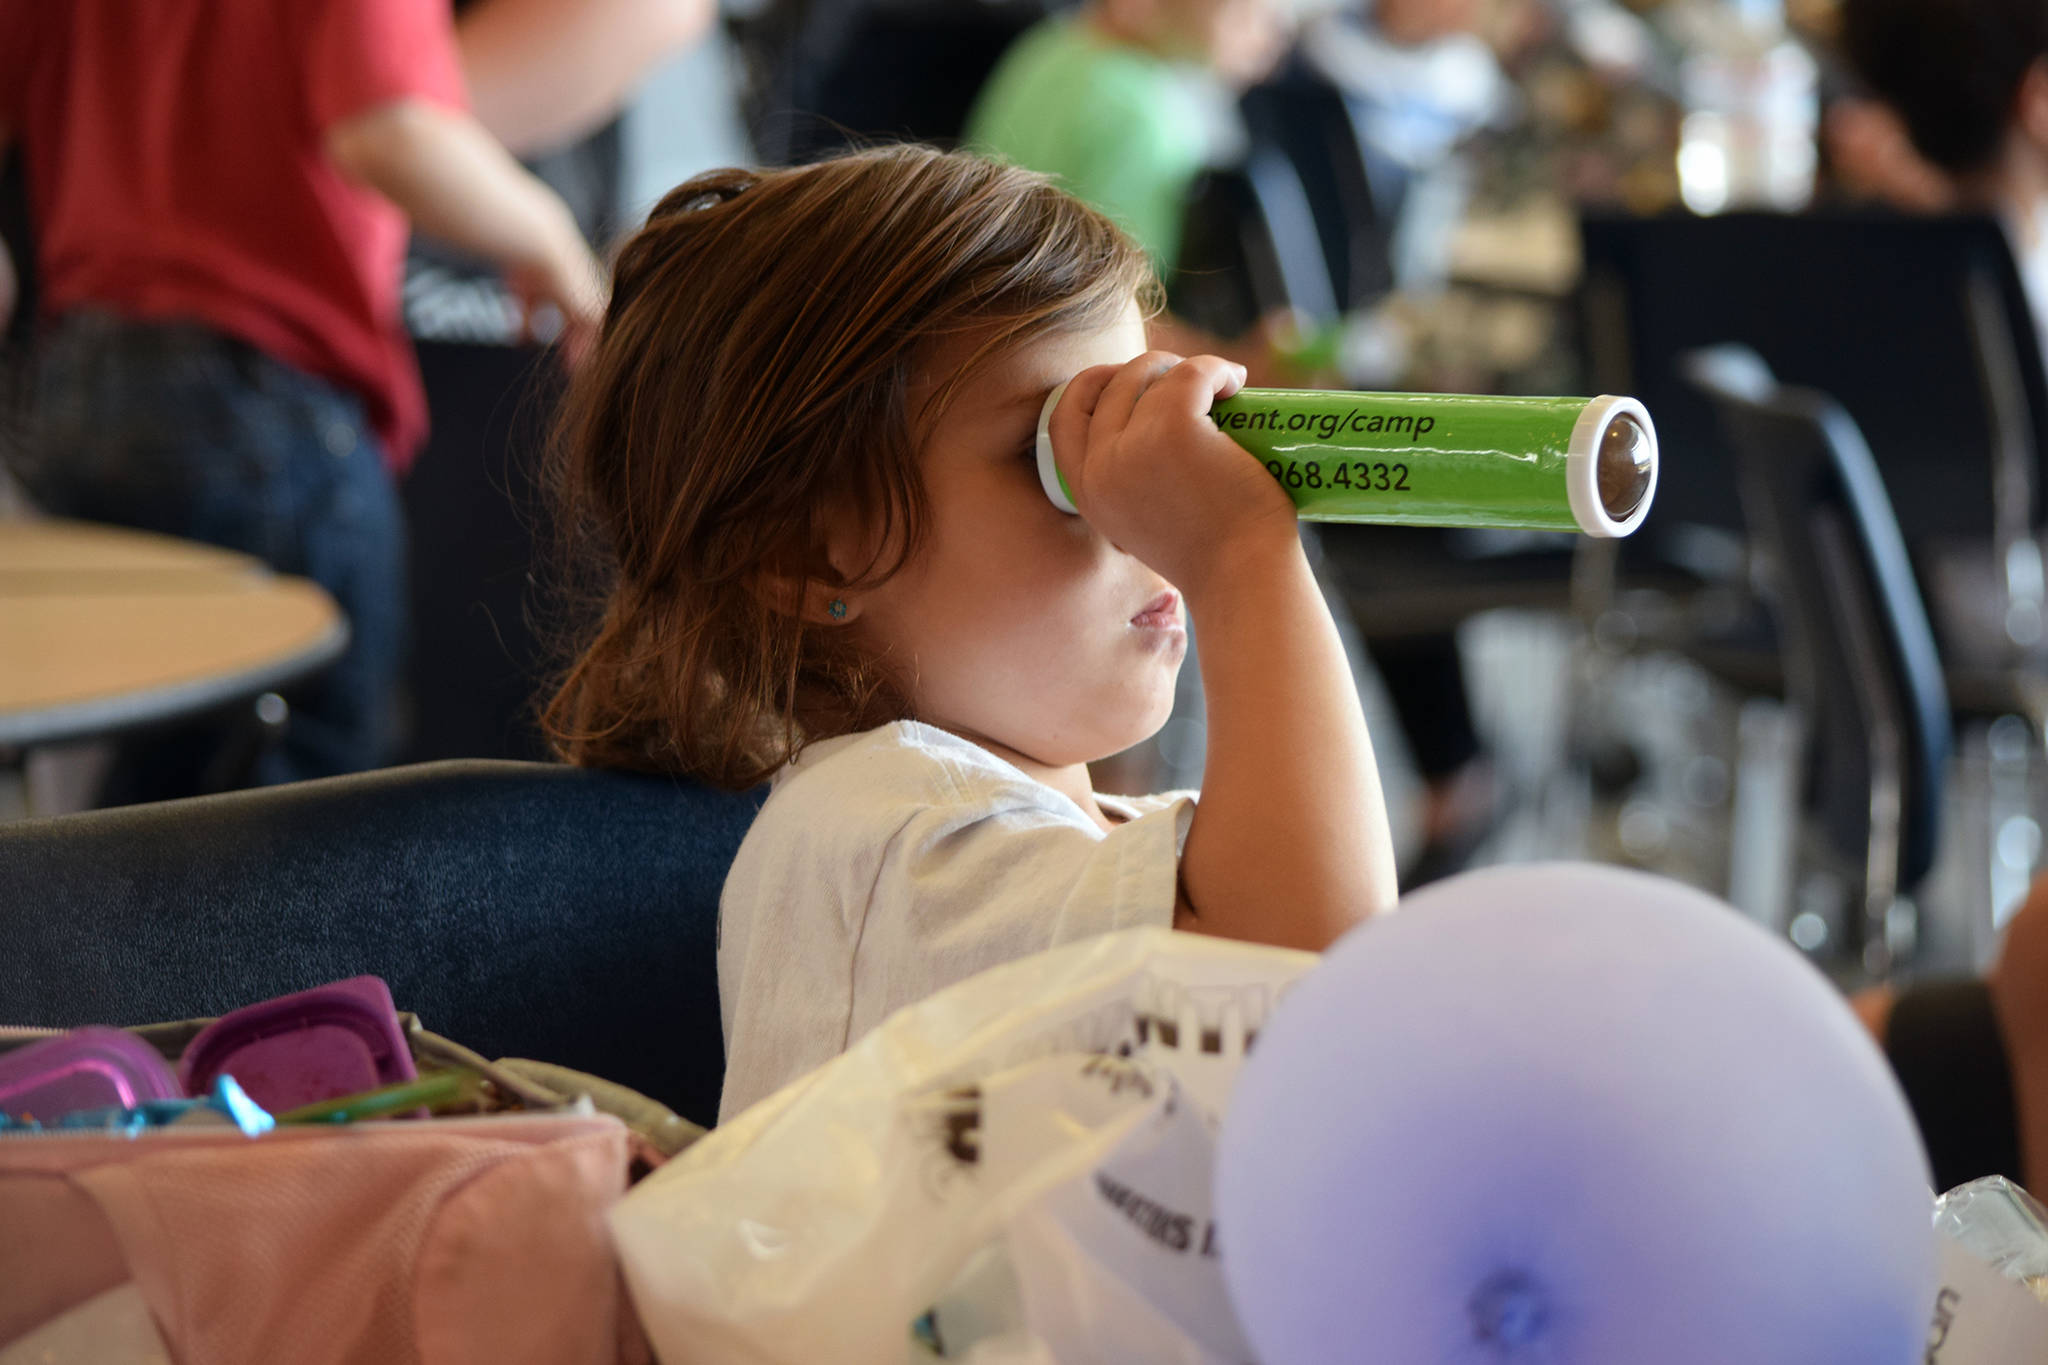 Kaelynn Beedle, 5, looks into a kaleidoscope during the Camp Invention showcase at Thunder Mountain High School, Friday June 7, 2019. (Ben Hohenstatt | Juneau Empire)